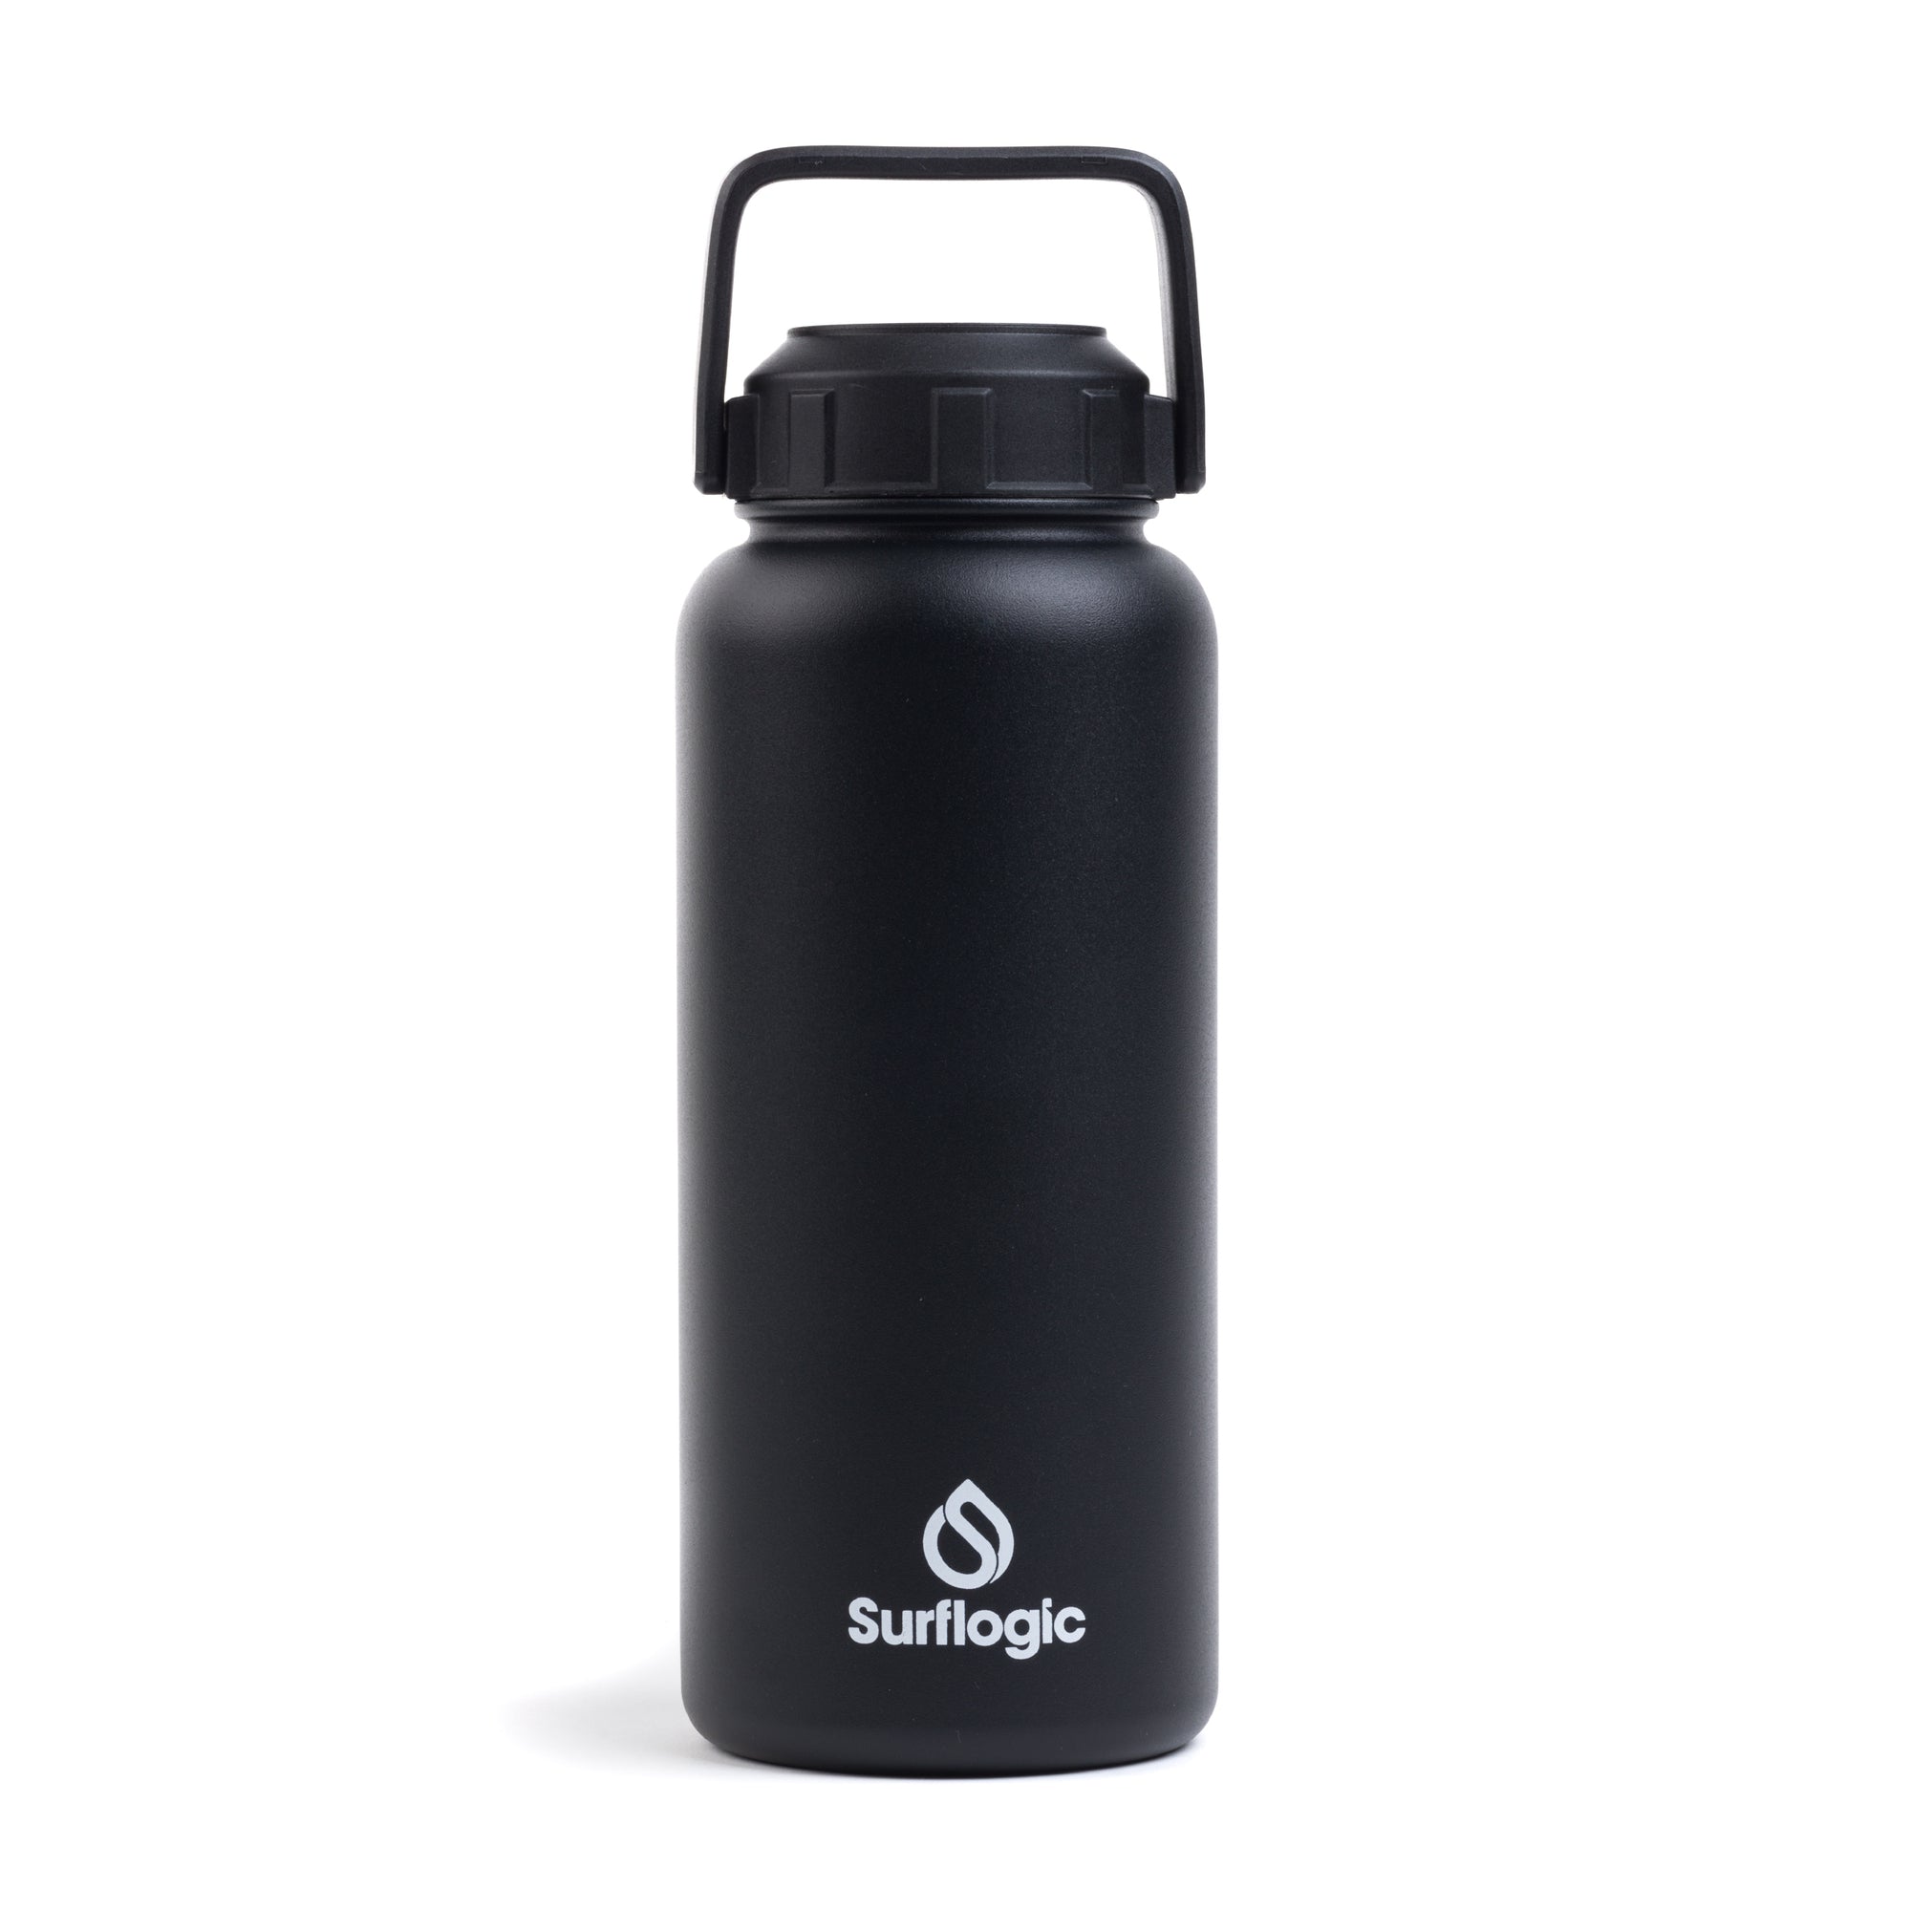 Surflogic Insulated Water Bottle 950 ml Wide Mouth